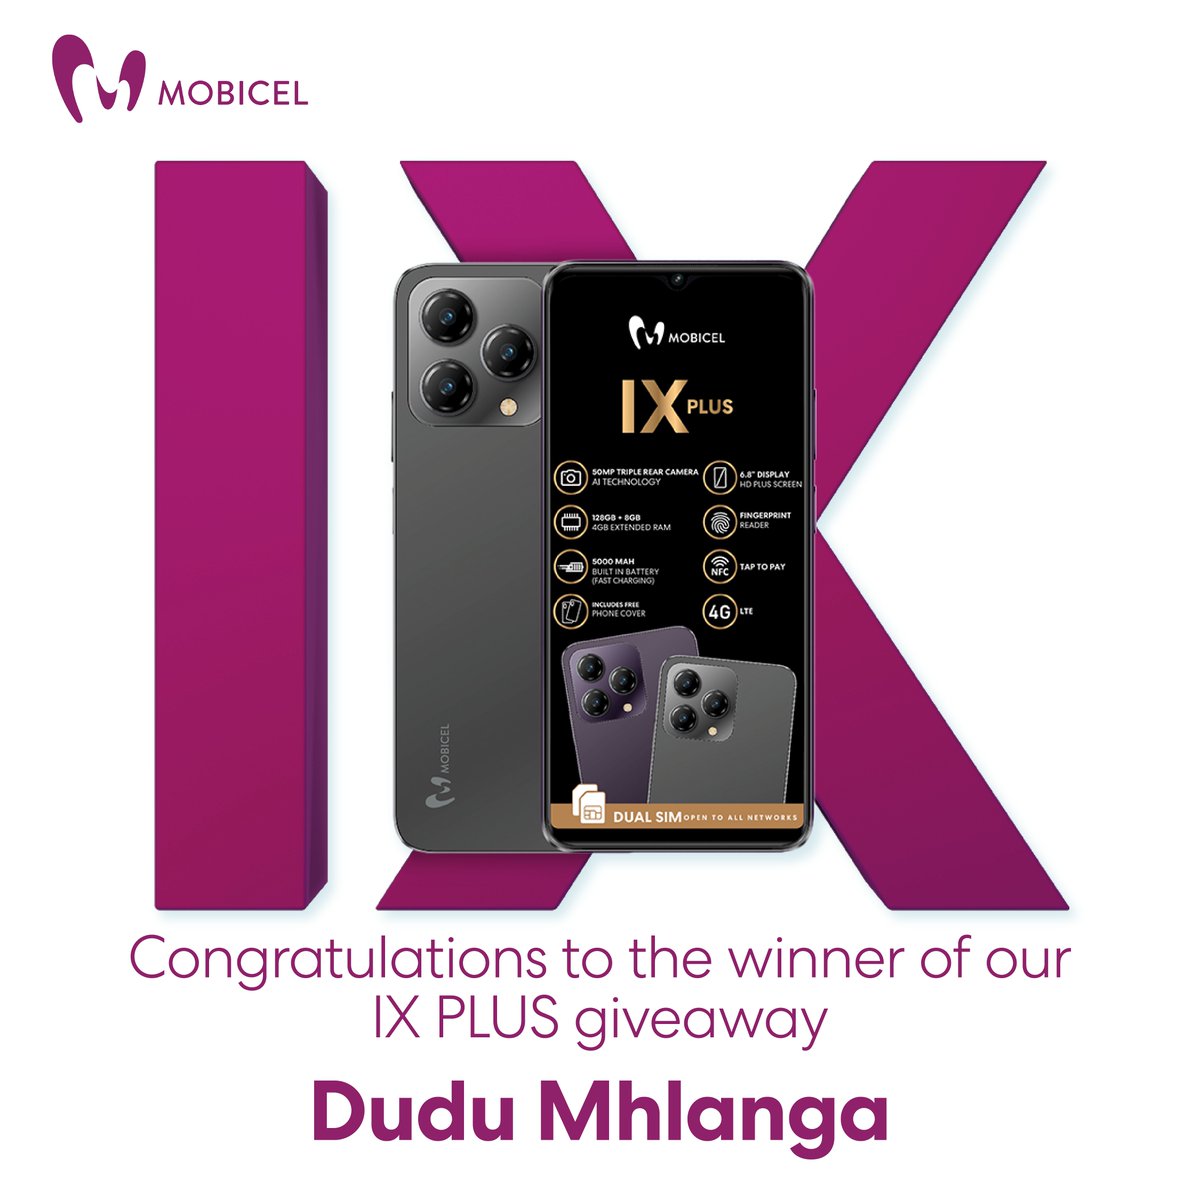 Congratulations to our lucky winner of the IX Plus giveaway! 📱🎉 A big thank you to everyone who participated. Stay tuned for more exciting competitions and chances to win with Mobicel! 🚀 #Mobicel #IXSeries